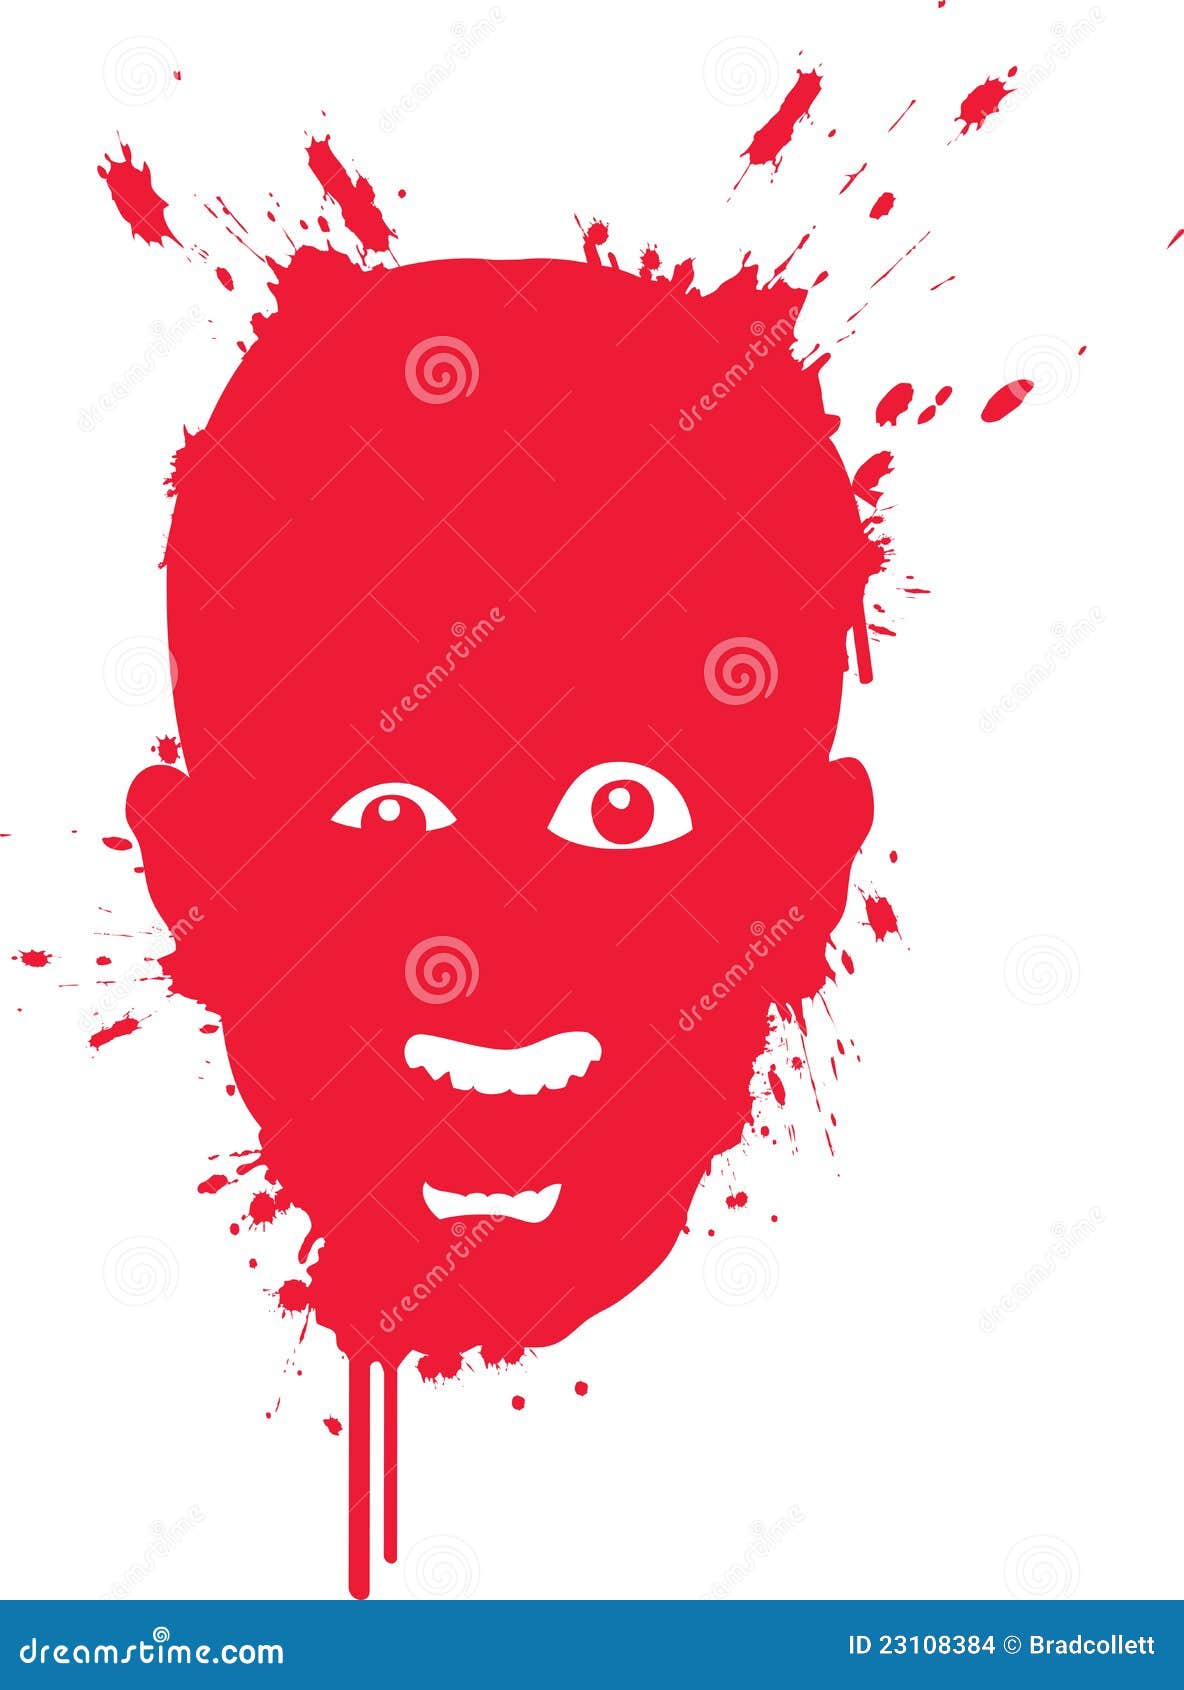 Mad Face stock vector. Illustration of looking, serious - 23108384